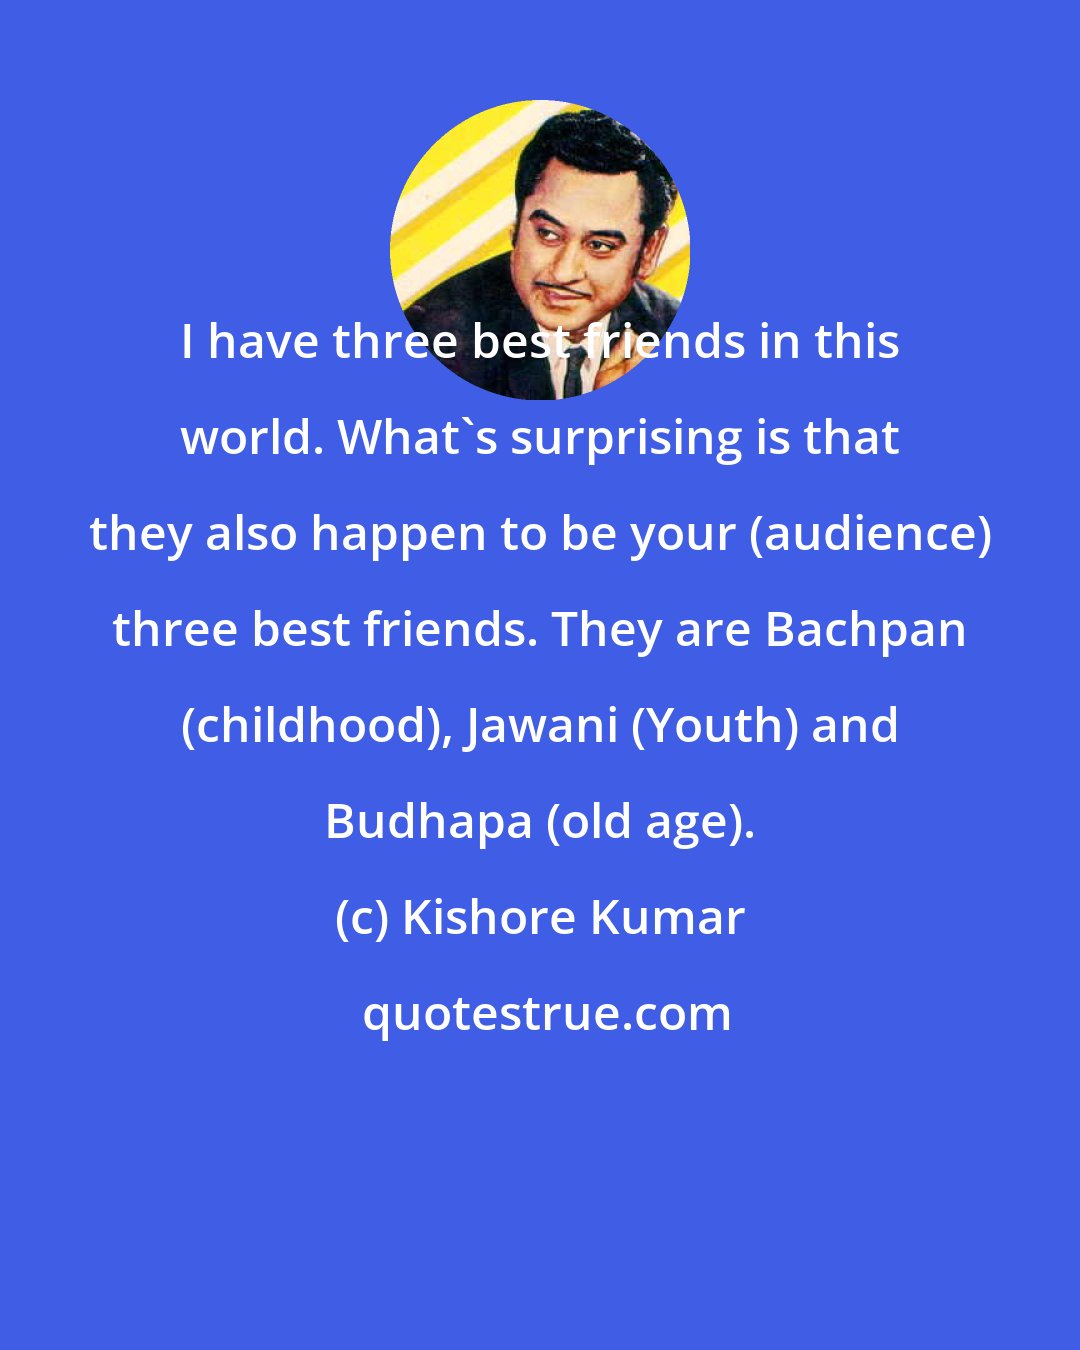 Kishore Kumar: I have three best friends in this world. What's surprising is that they also happen to be your (audience) three best friends. They are Bachpan (childhood), Jawani (Youth) and Budhapa (old age).